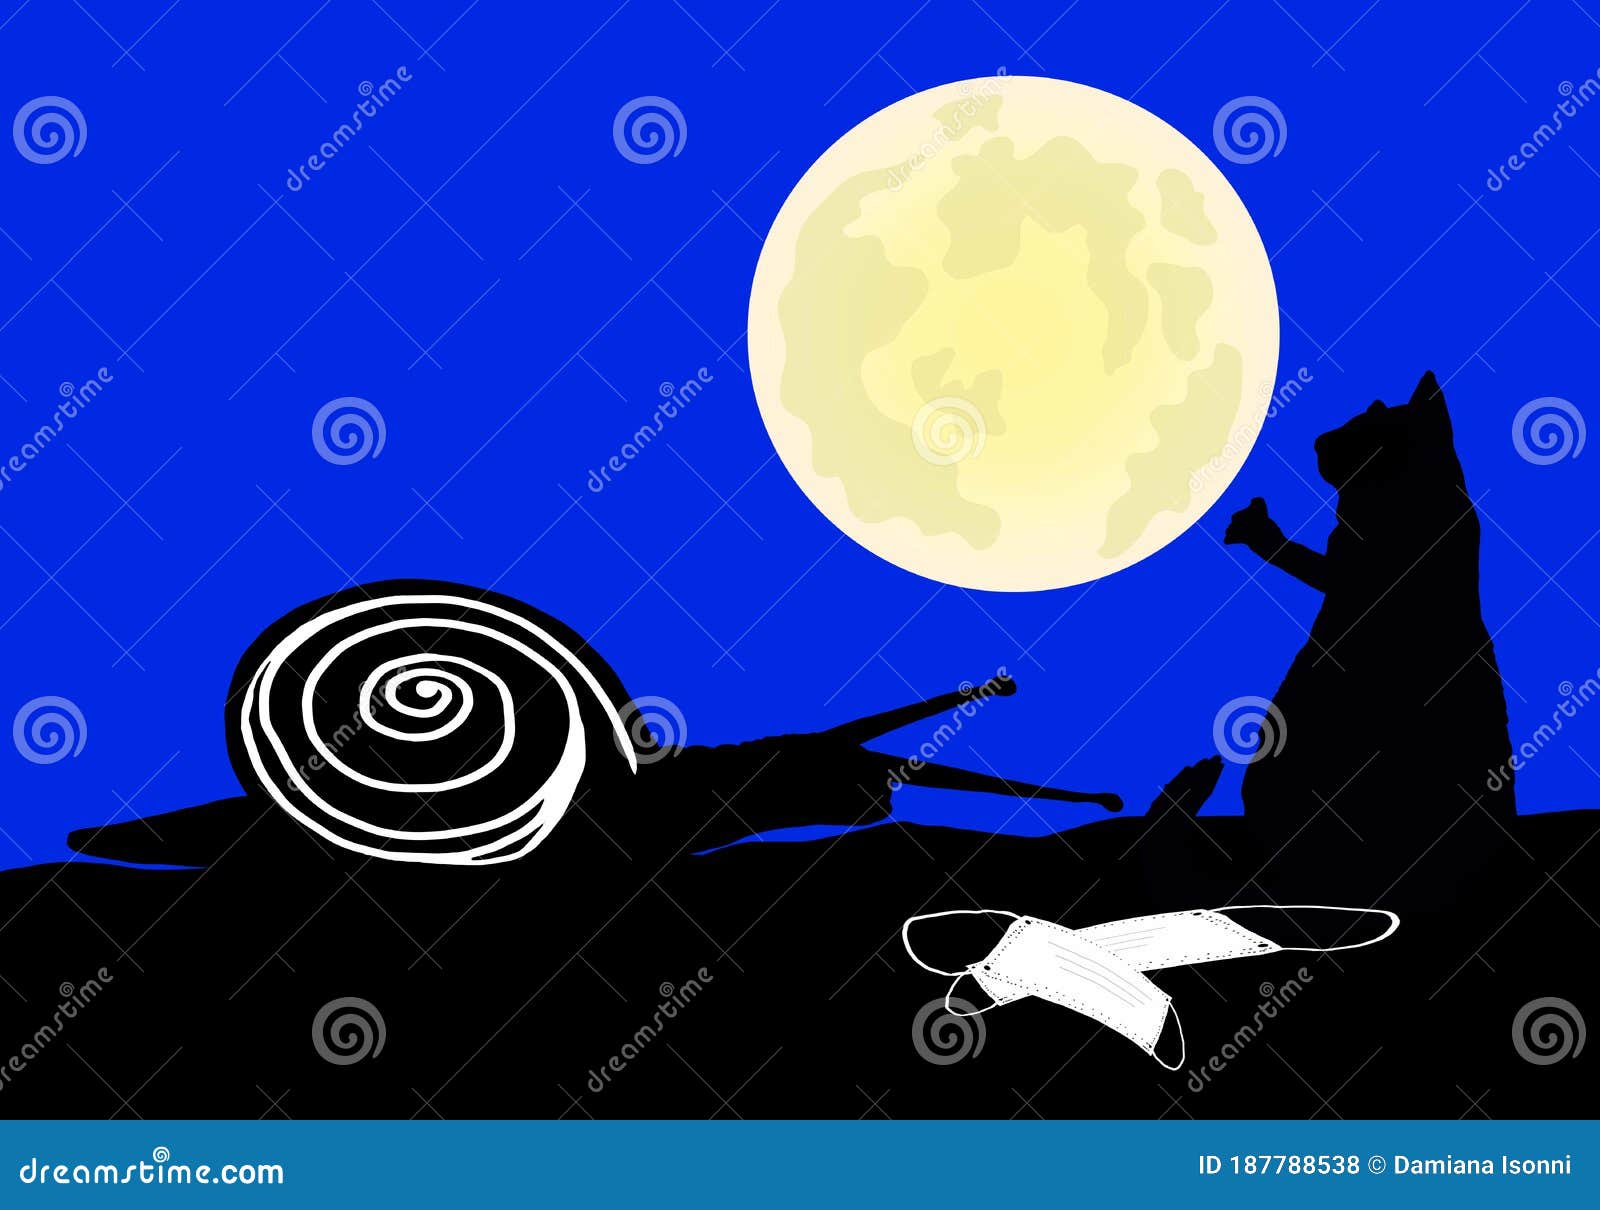 snail and cat with masks on the ground with moon